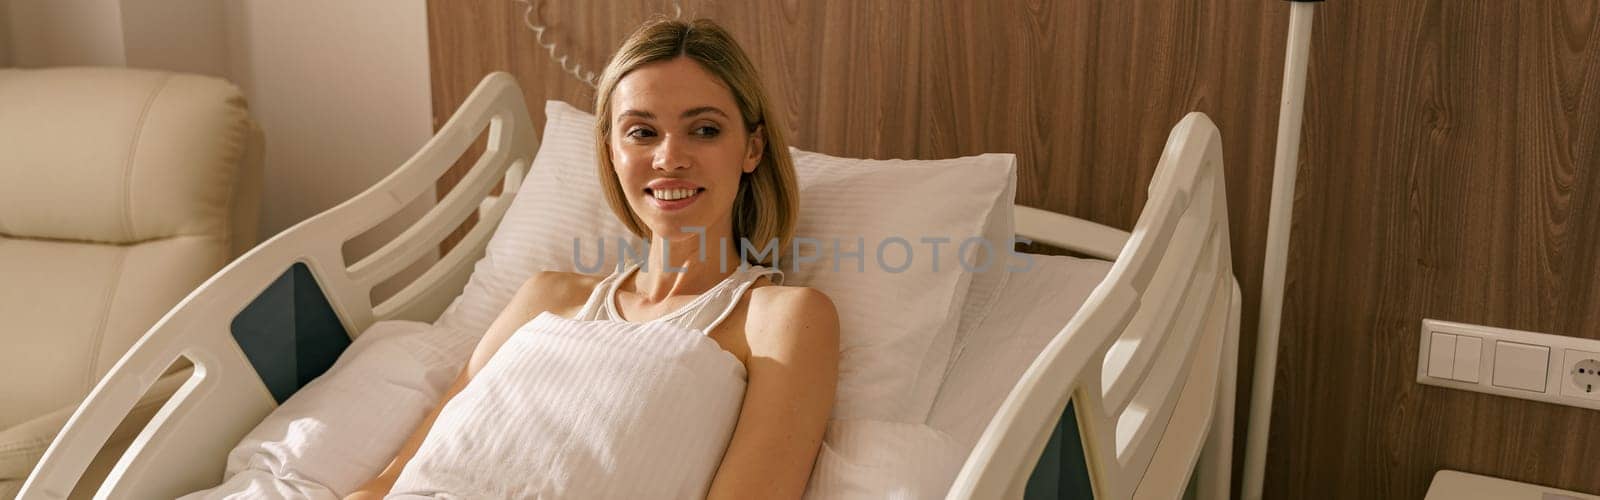 Smiling woman lying on bed at modern hospital ward after surgery. Health care and medicine concept by Yaroslav_astakhov